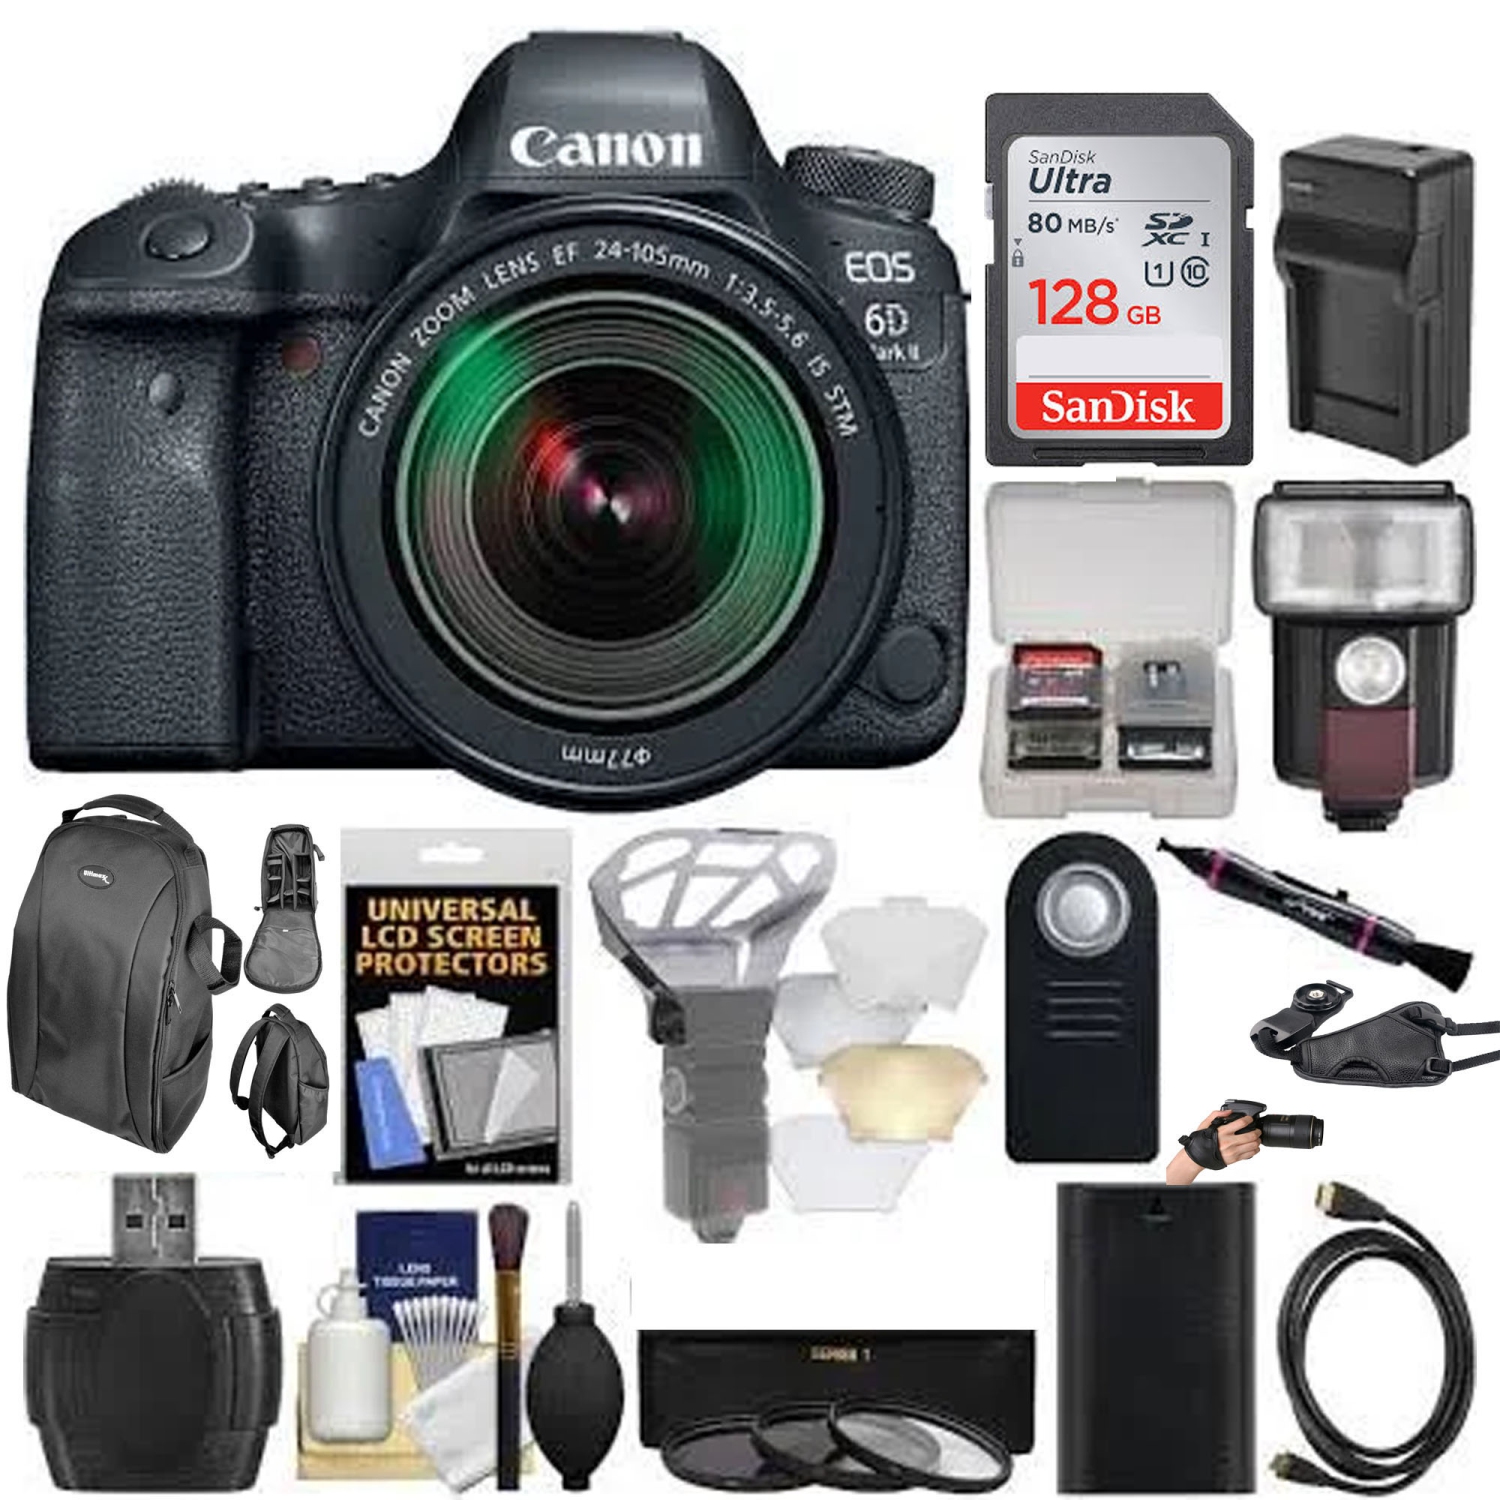 Canon EOS 6D Mark II Wi-Fi Digital & EF 24-105mm IS STM Lens with 128GB Card + Backpack + Flash + Diffuser + Battery & Charger - US Version w/ Seller Warranty